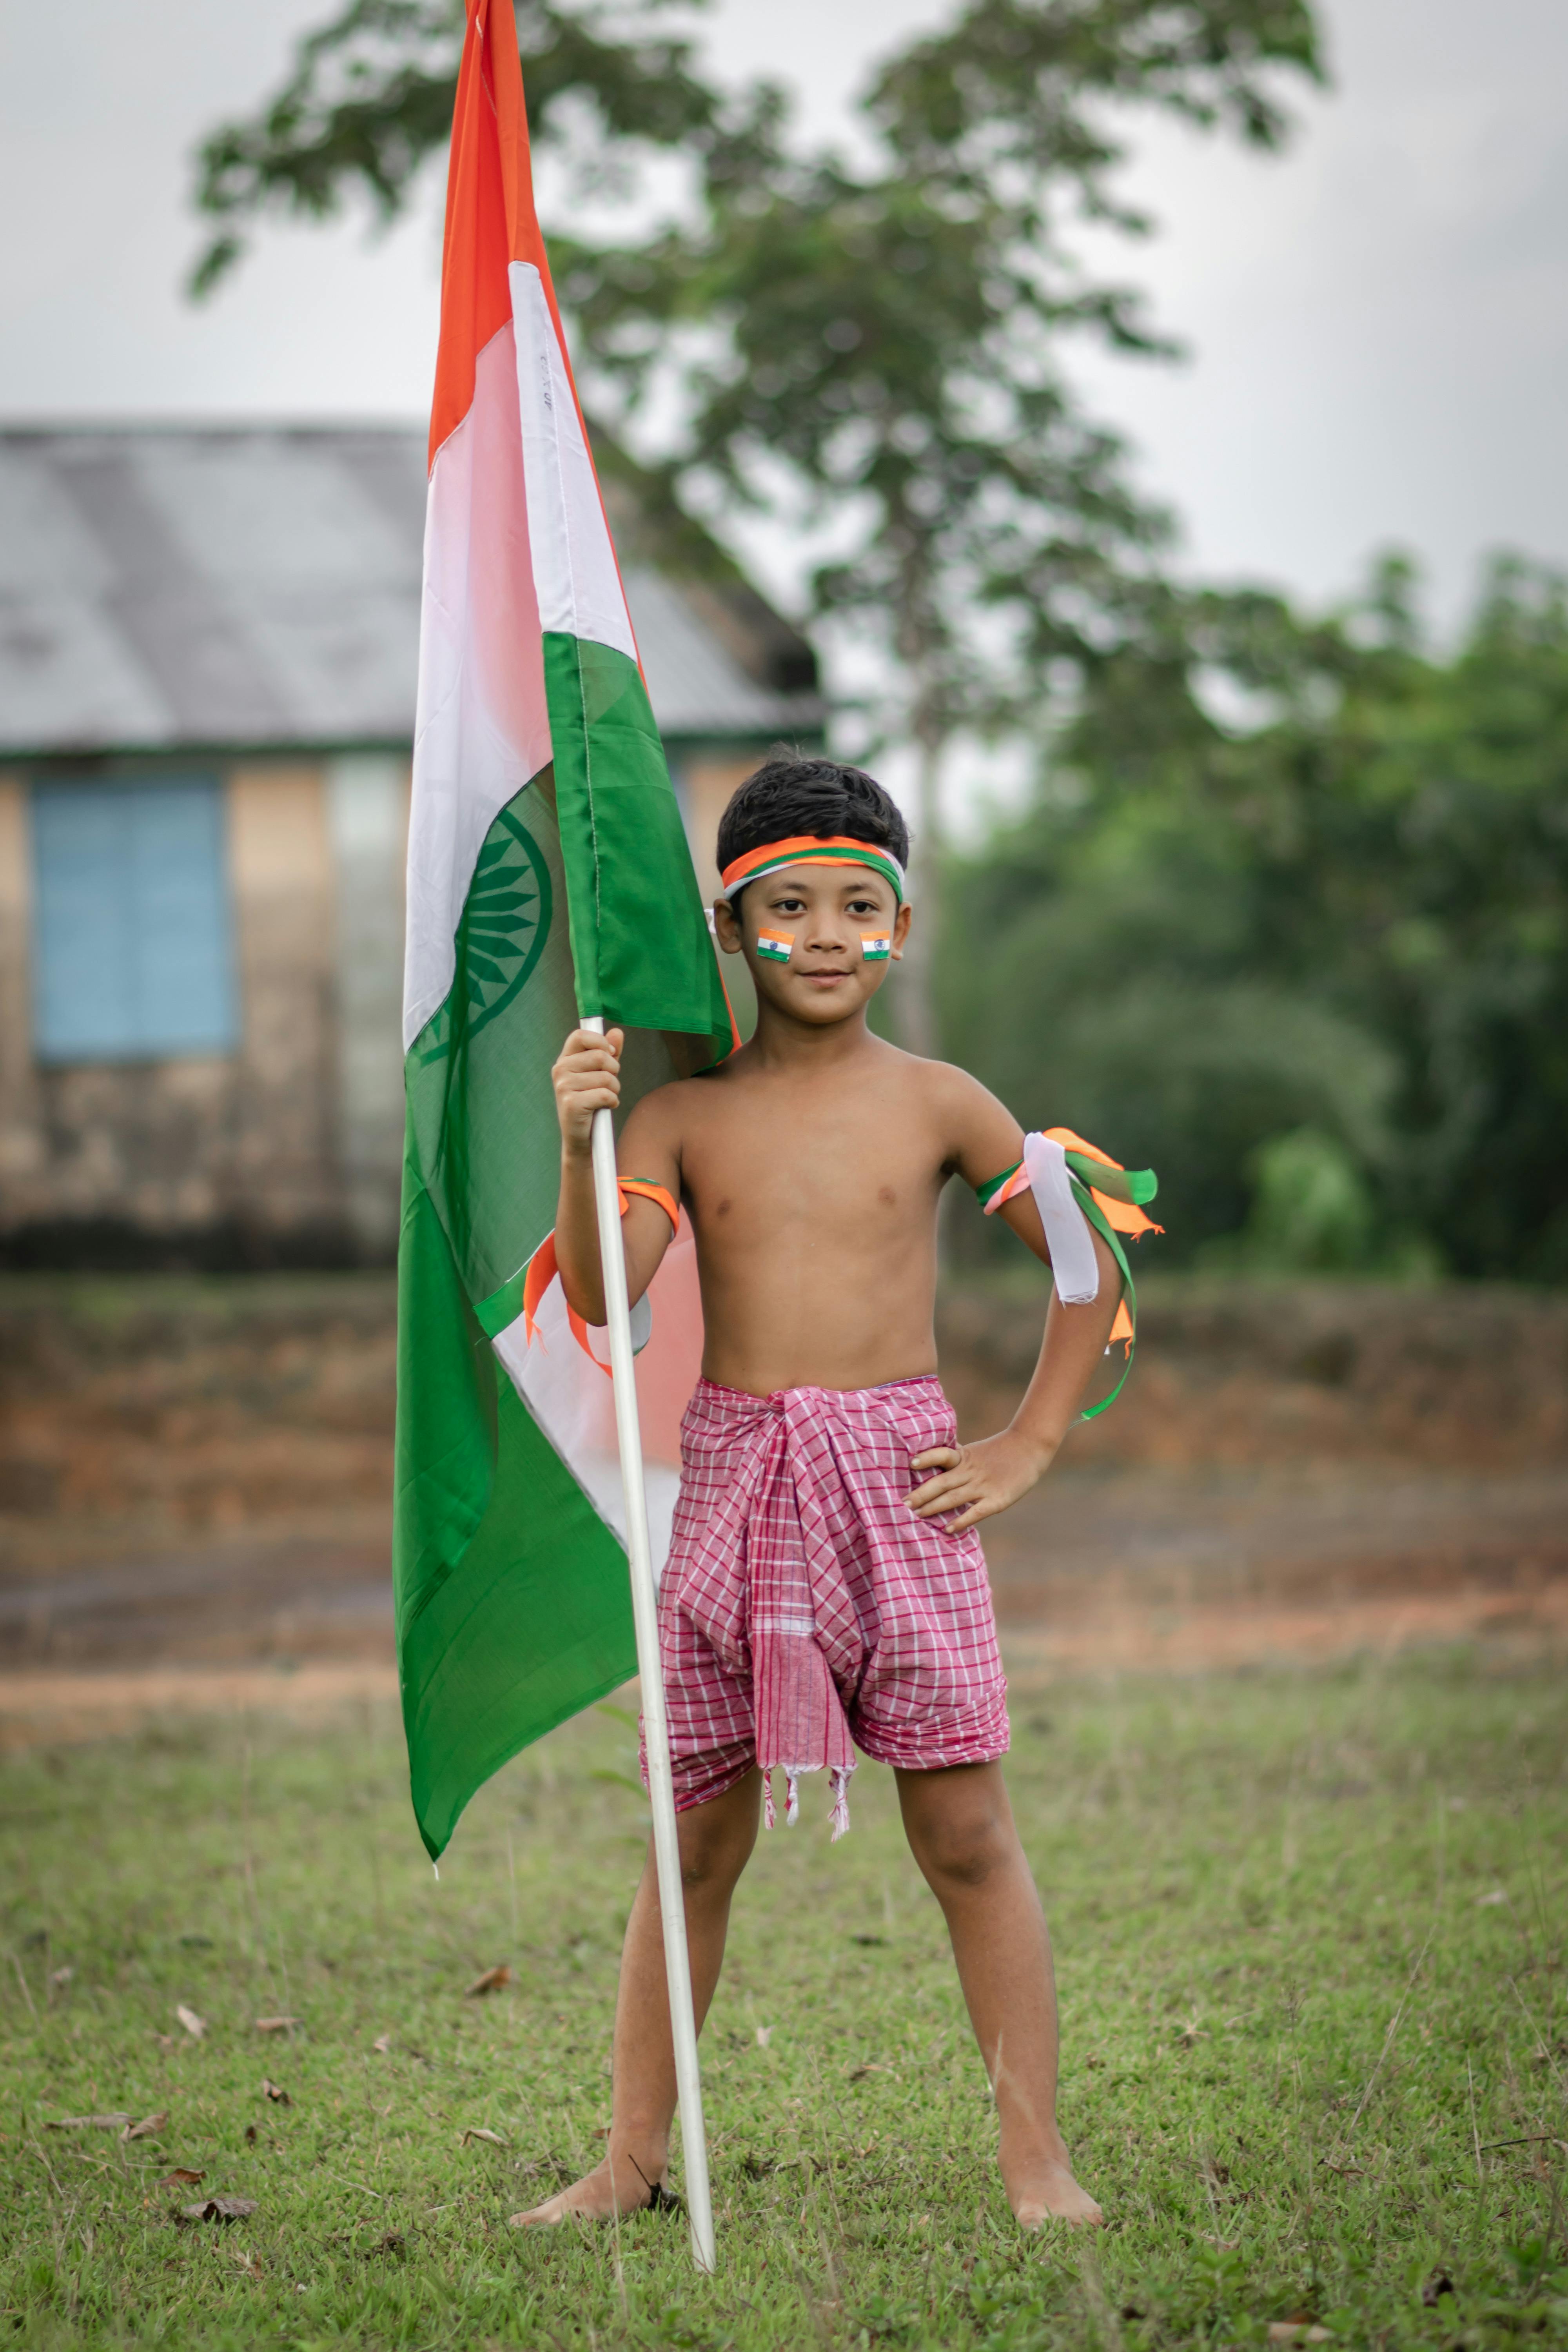 India Independence Day | Indian flag wallpaper, Indian flag, Indian flag pic